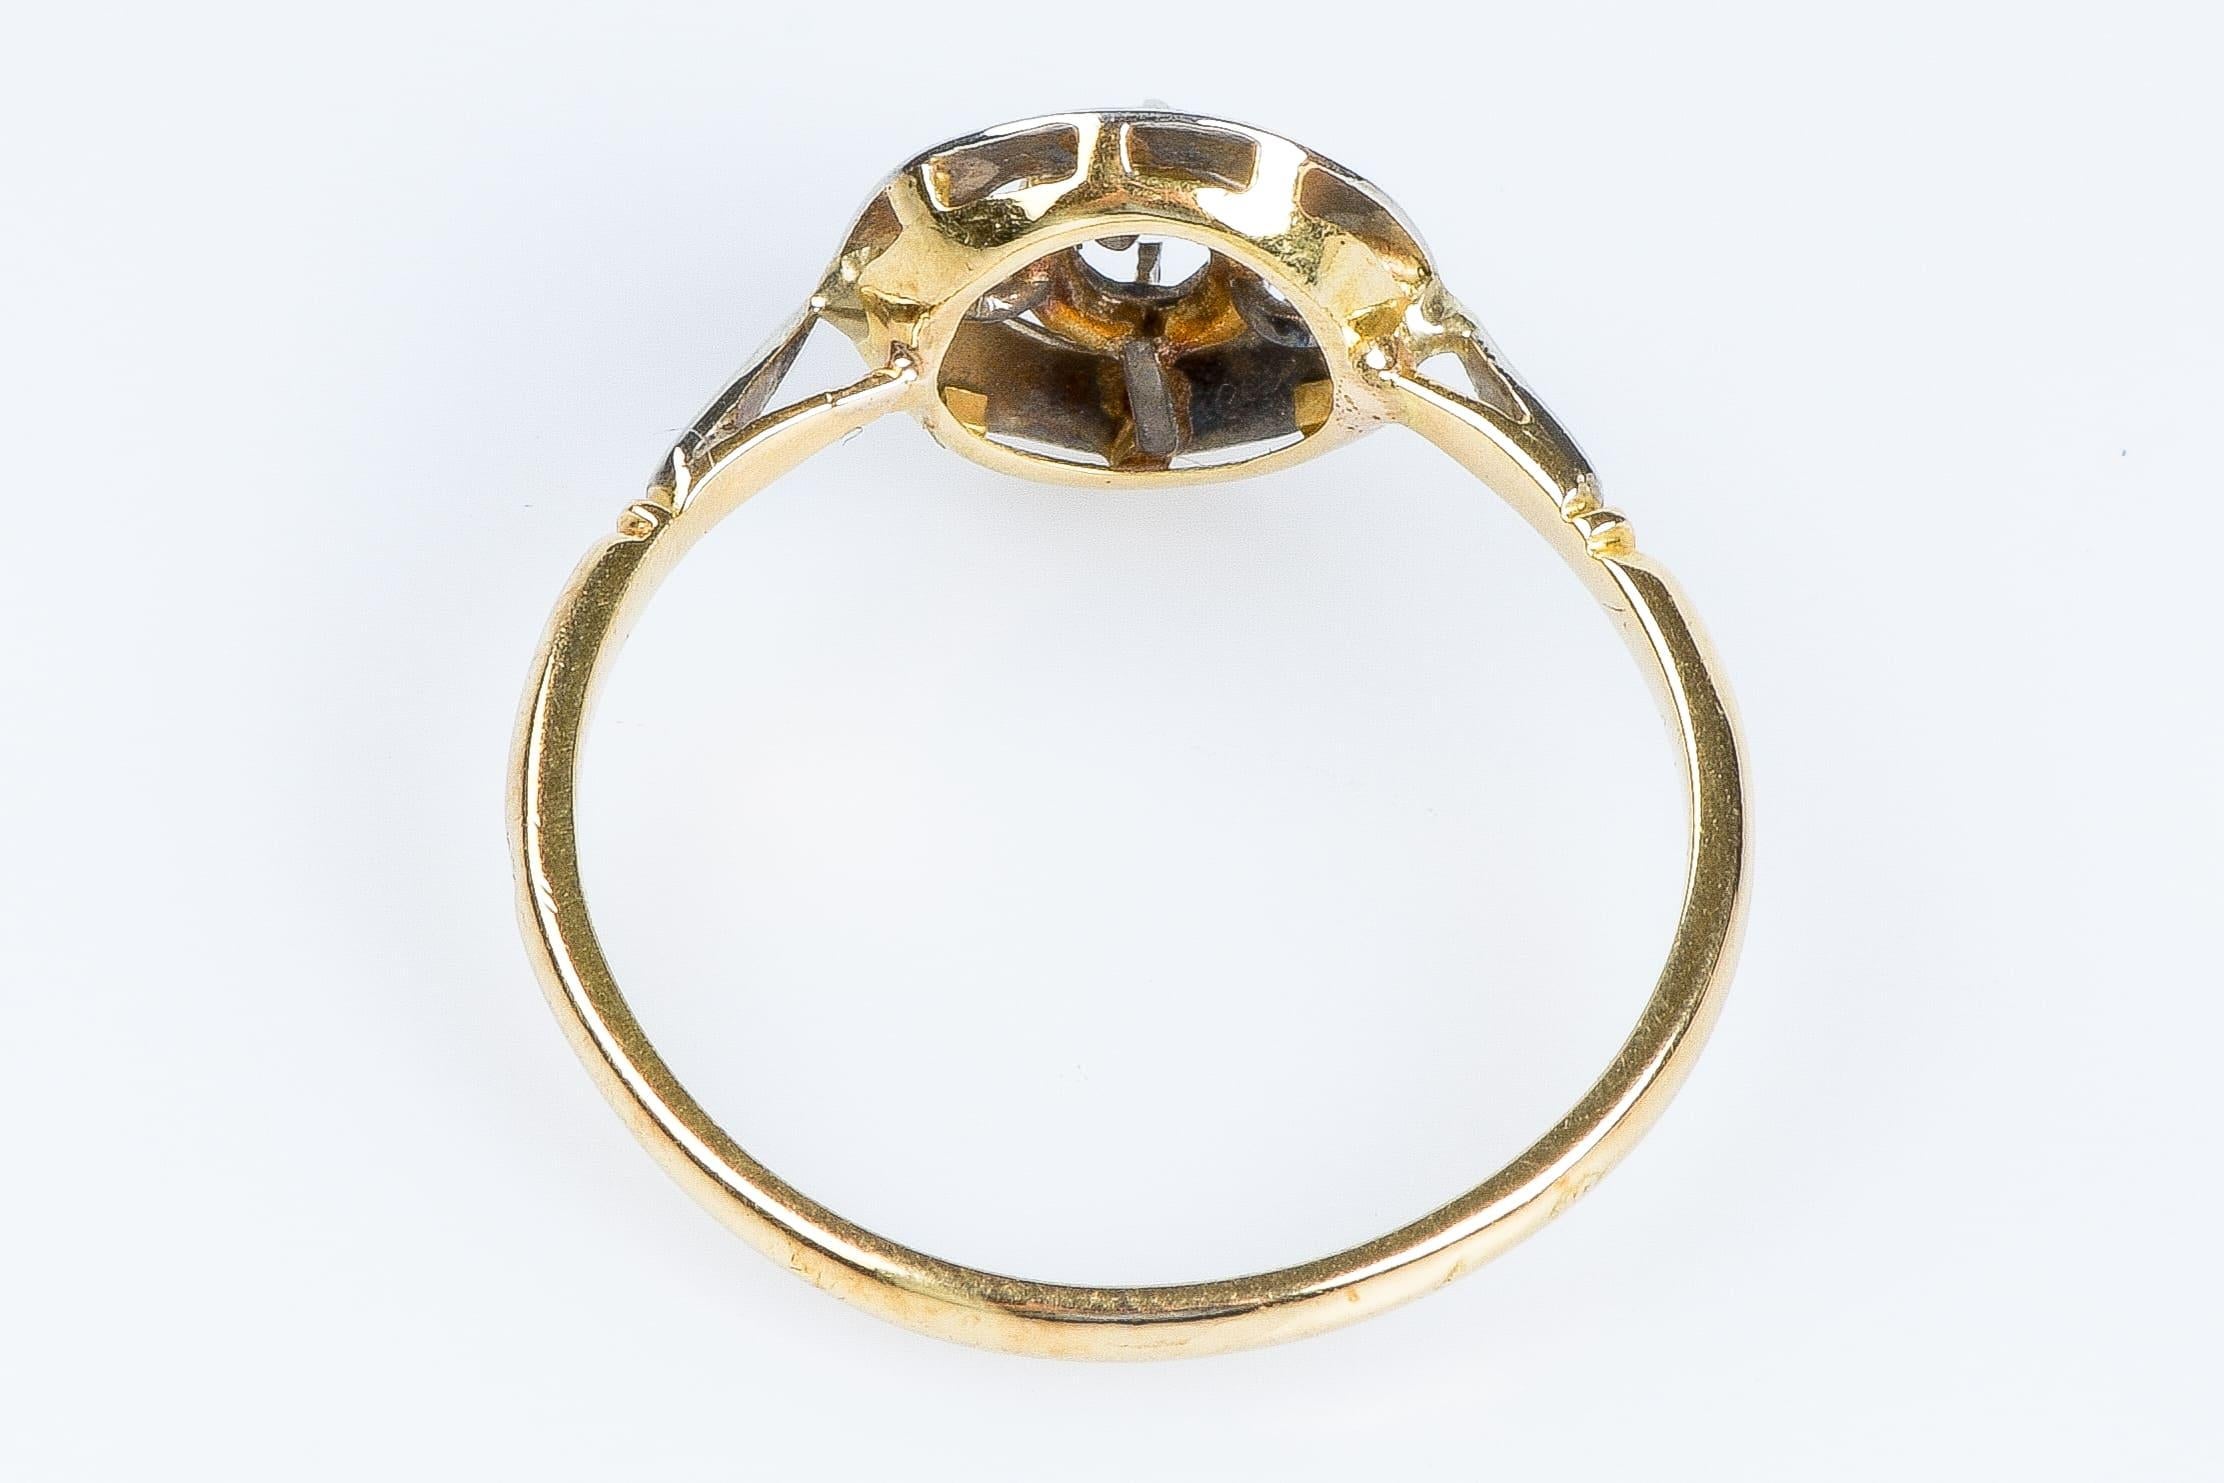 Antique 18-carat yellow gold ring decorated with zirconium oxide For Sale 5